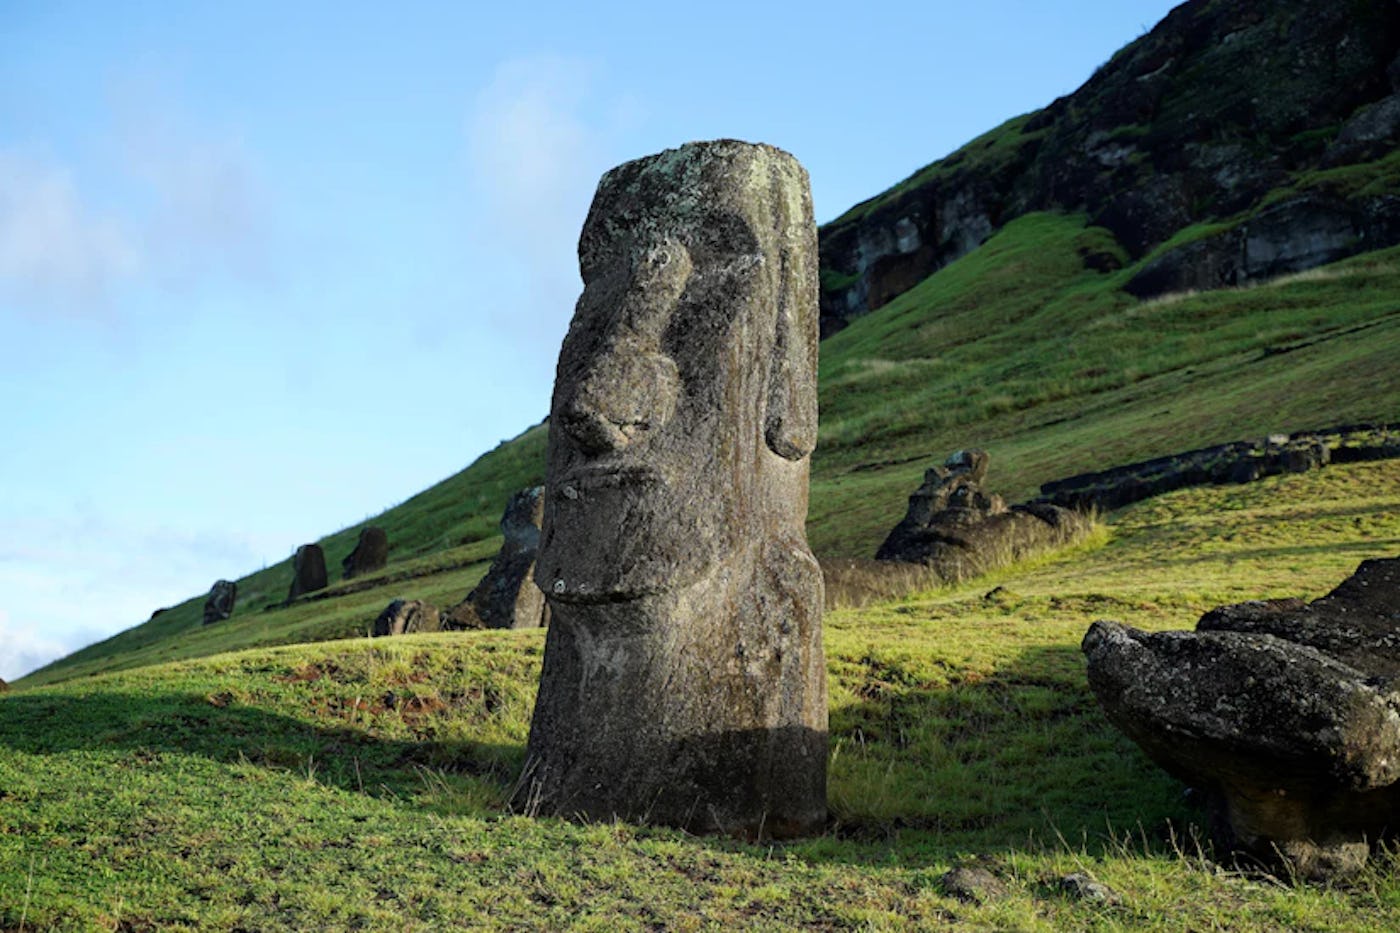 Moai statue on the grassy slopes of Rano Raraku, Easter Island, with others scattered in the background.